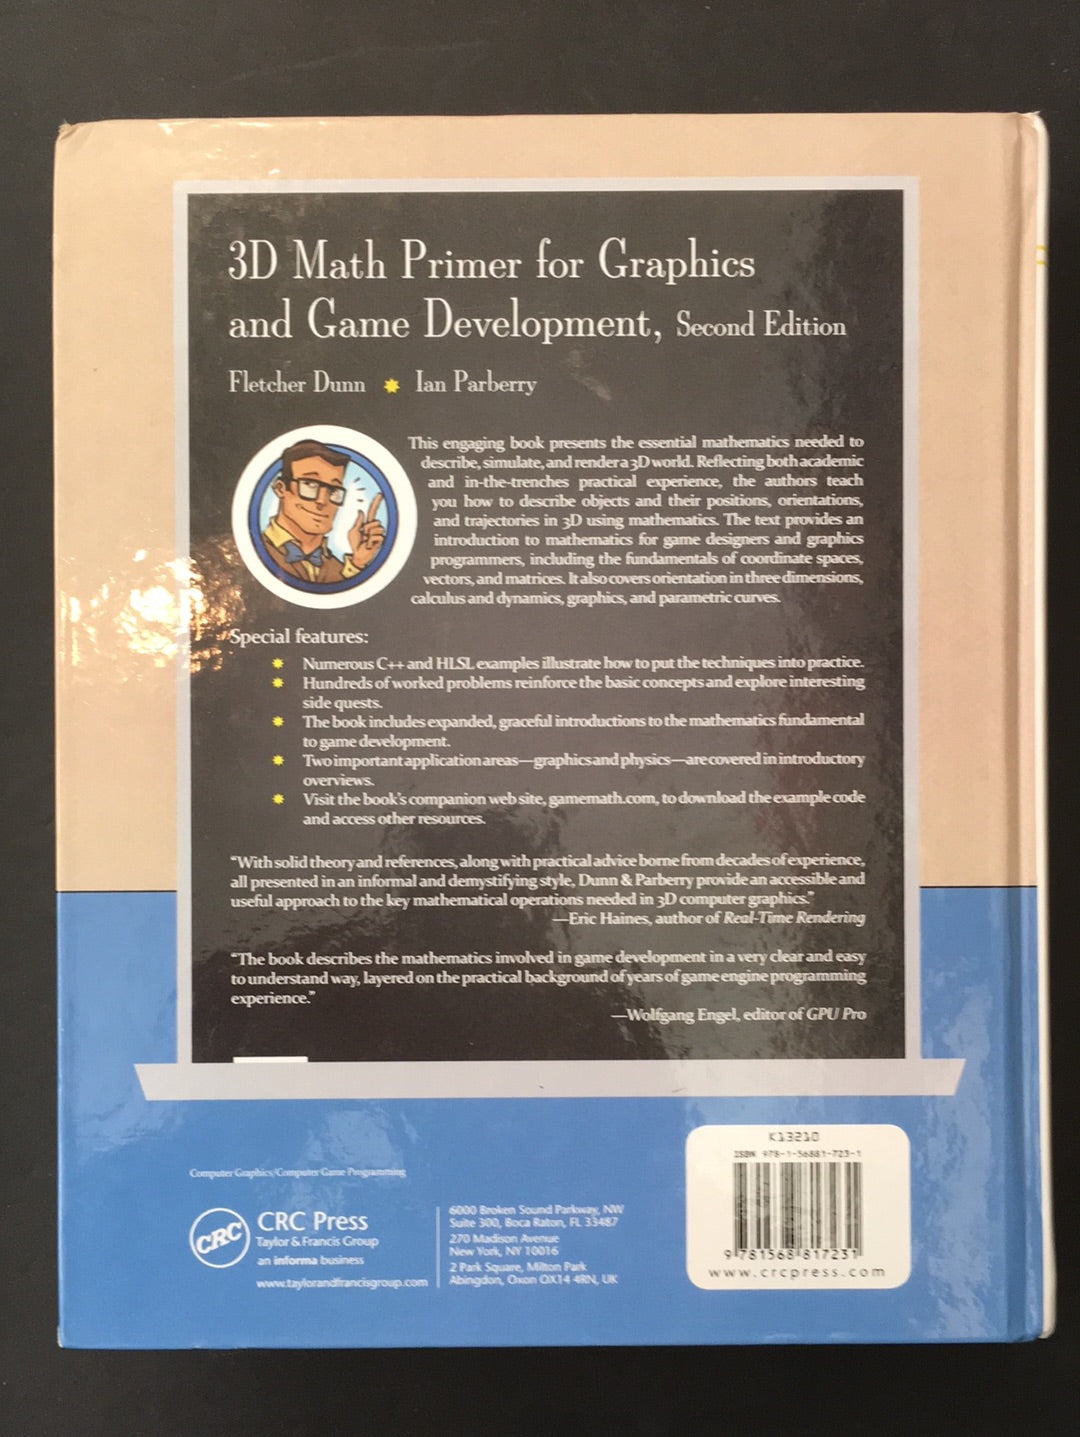 3D MATH PRIMER FOR GRAPHICS AND GAME DEVELOPMENT